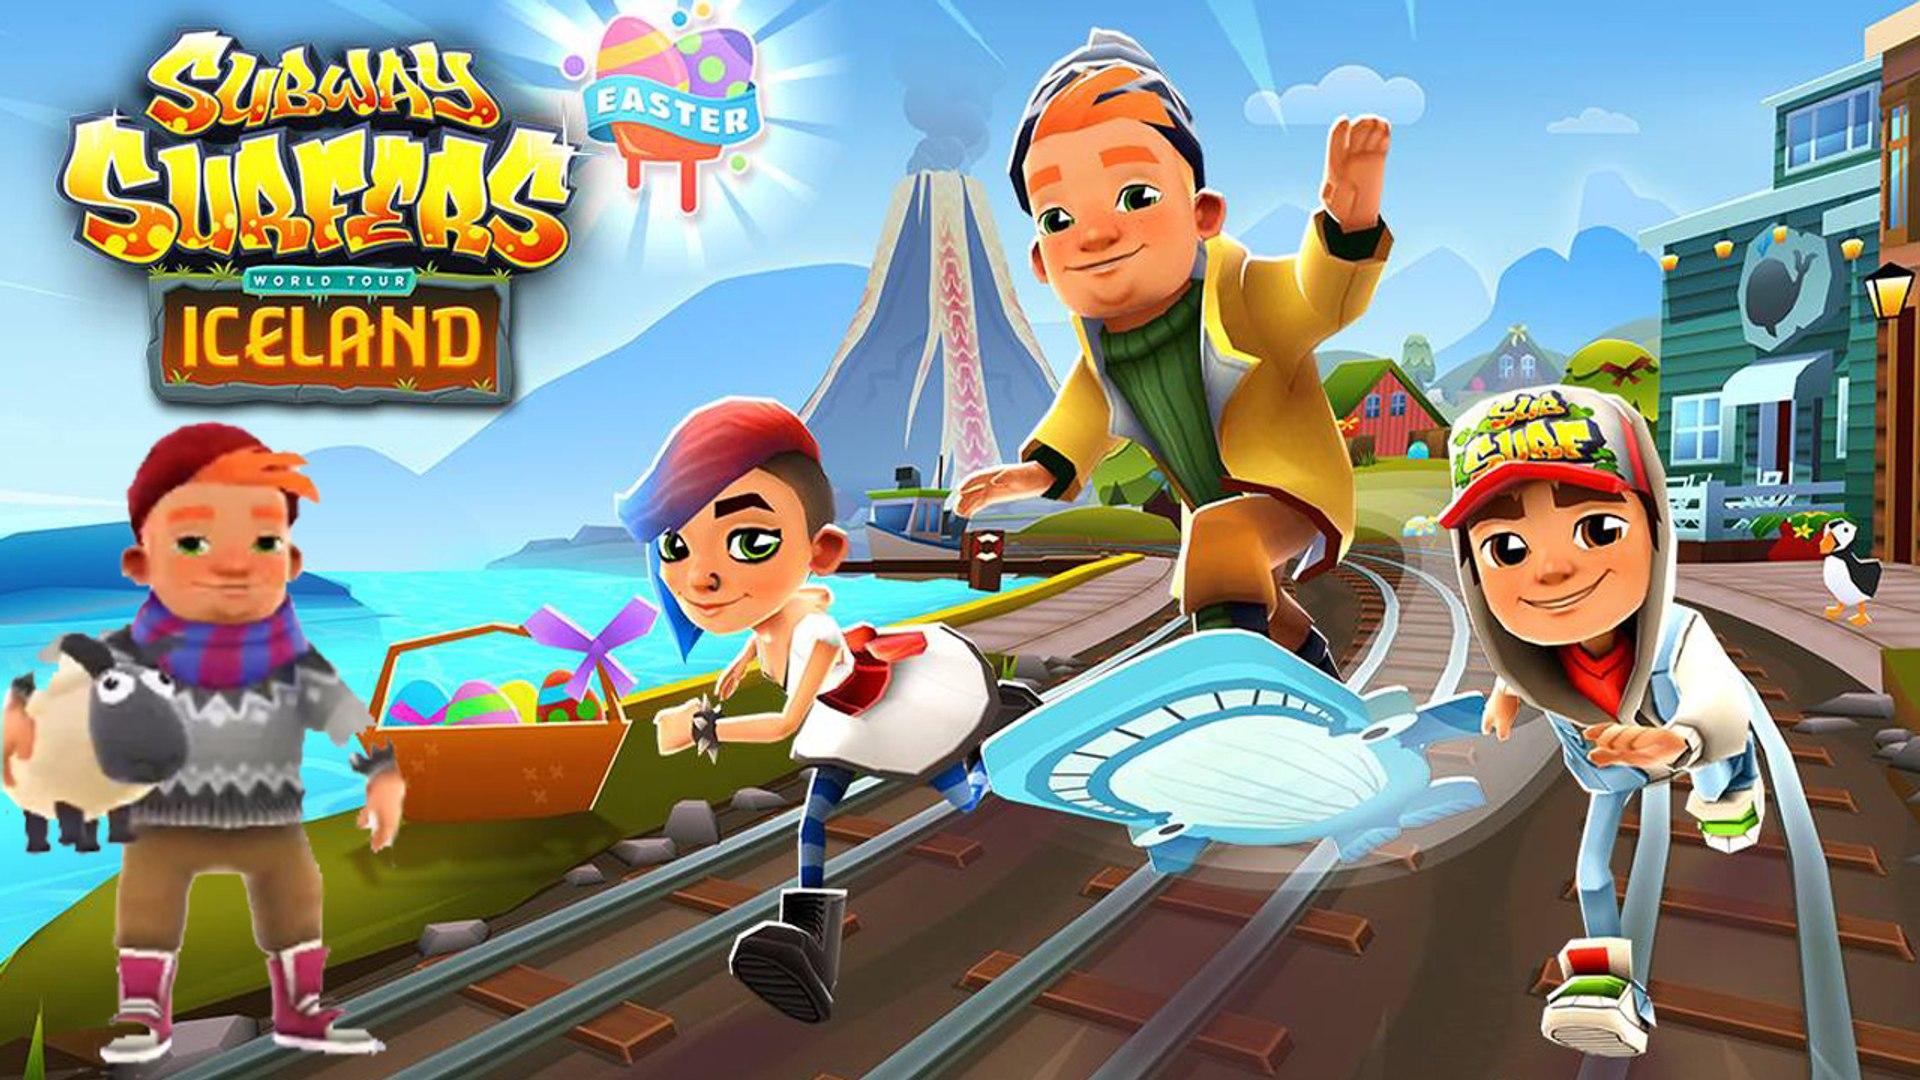 Subway Surfers World Tour Iceland Bjarki's Fisher Outfit